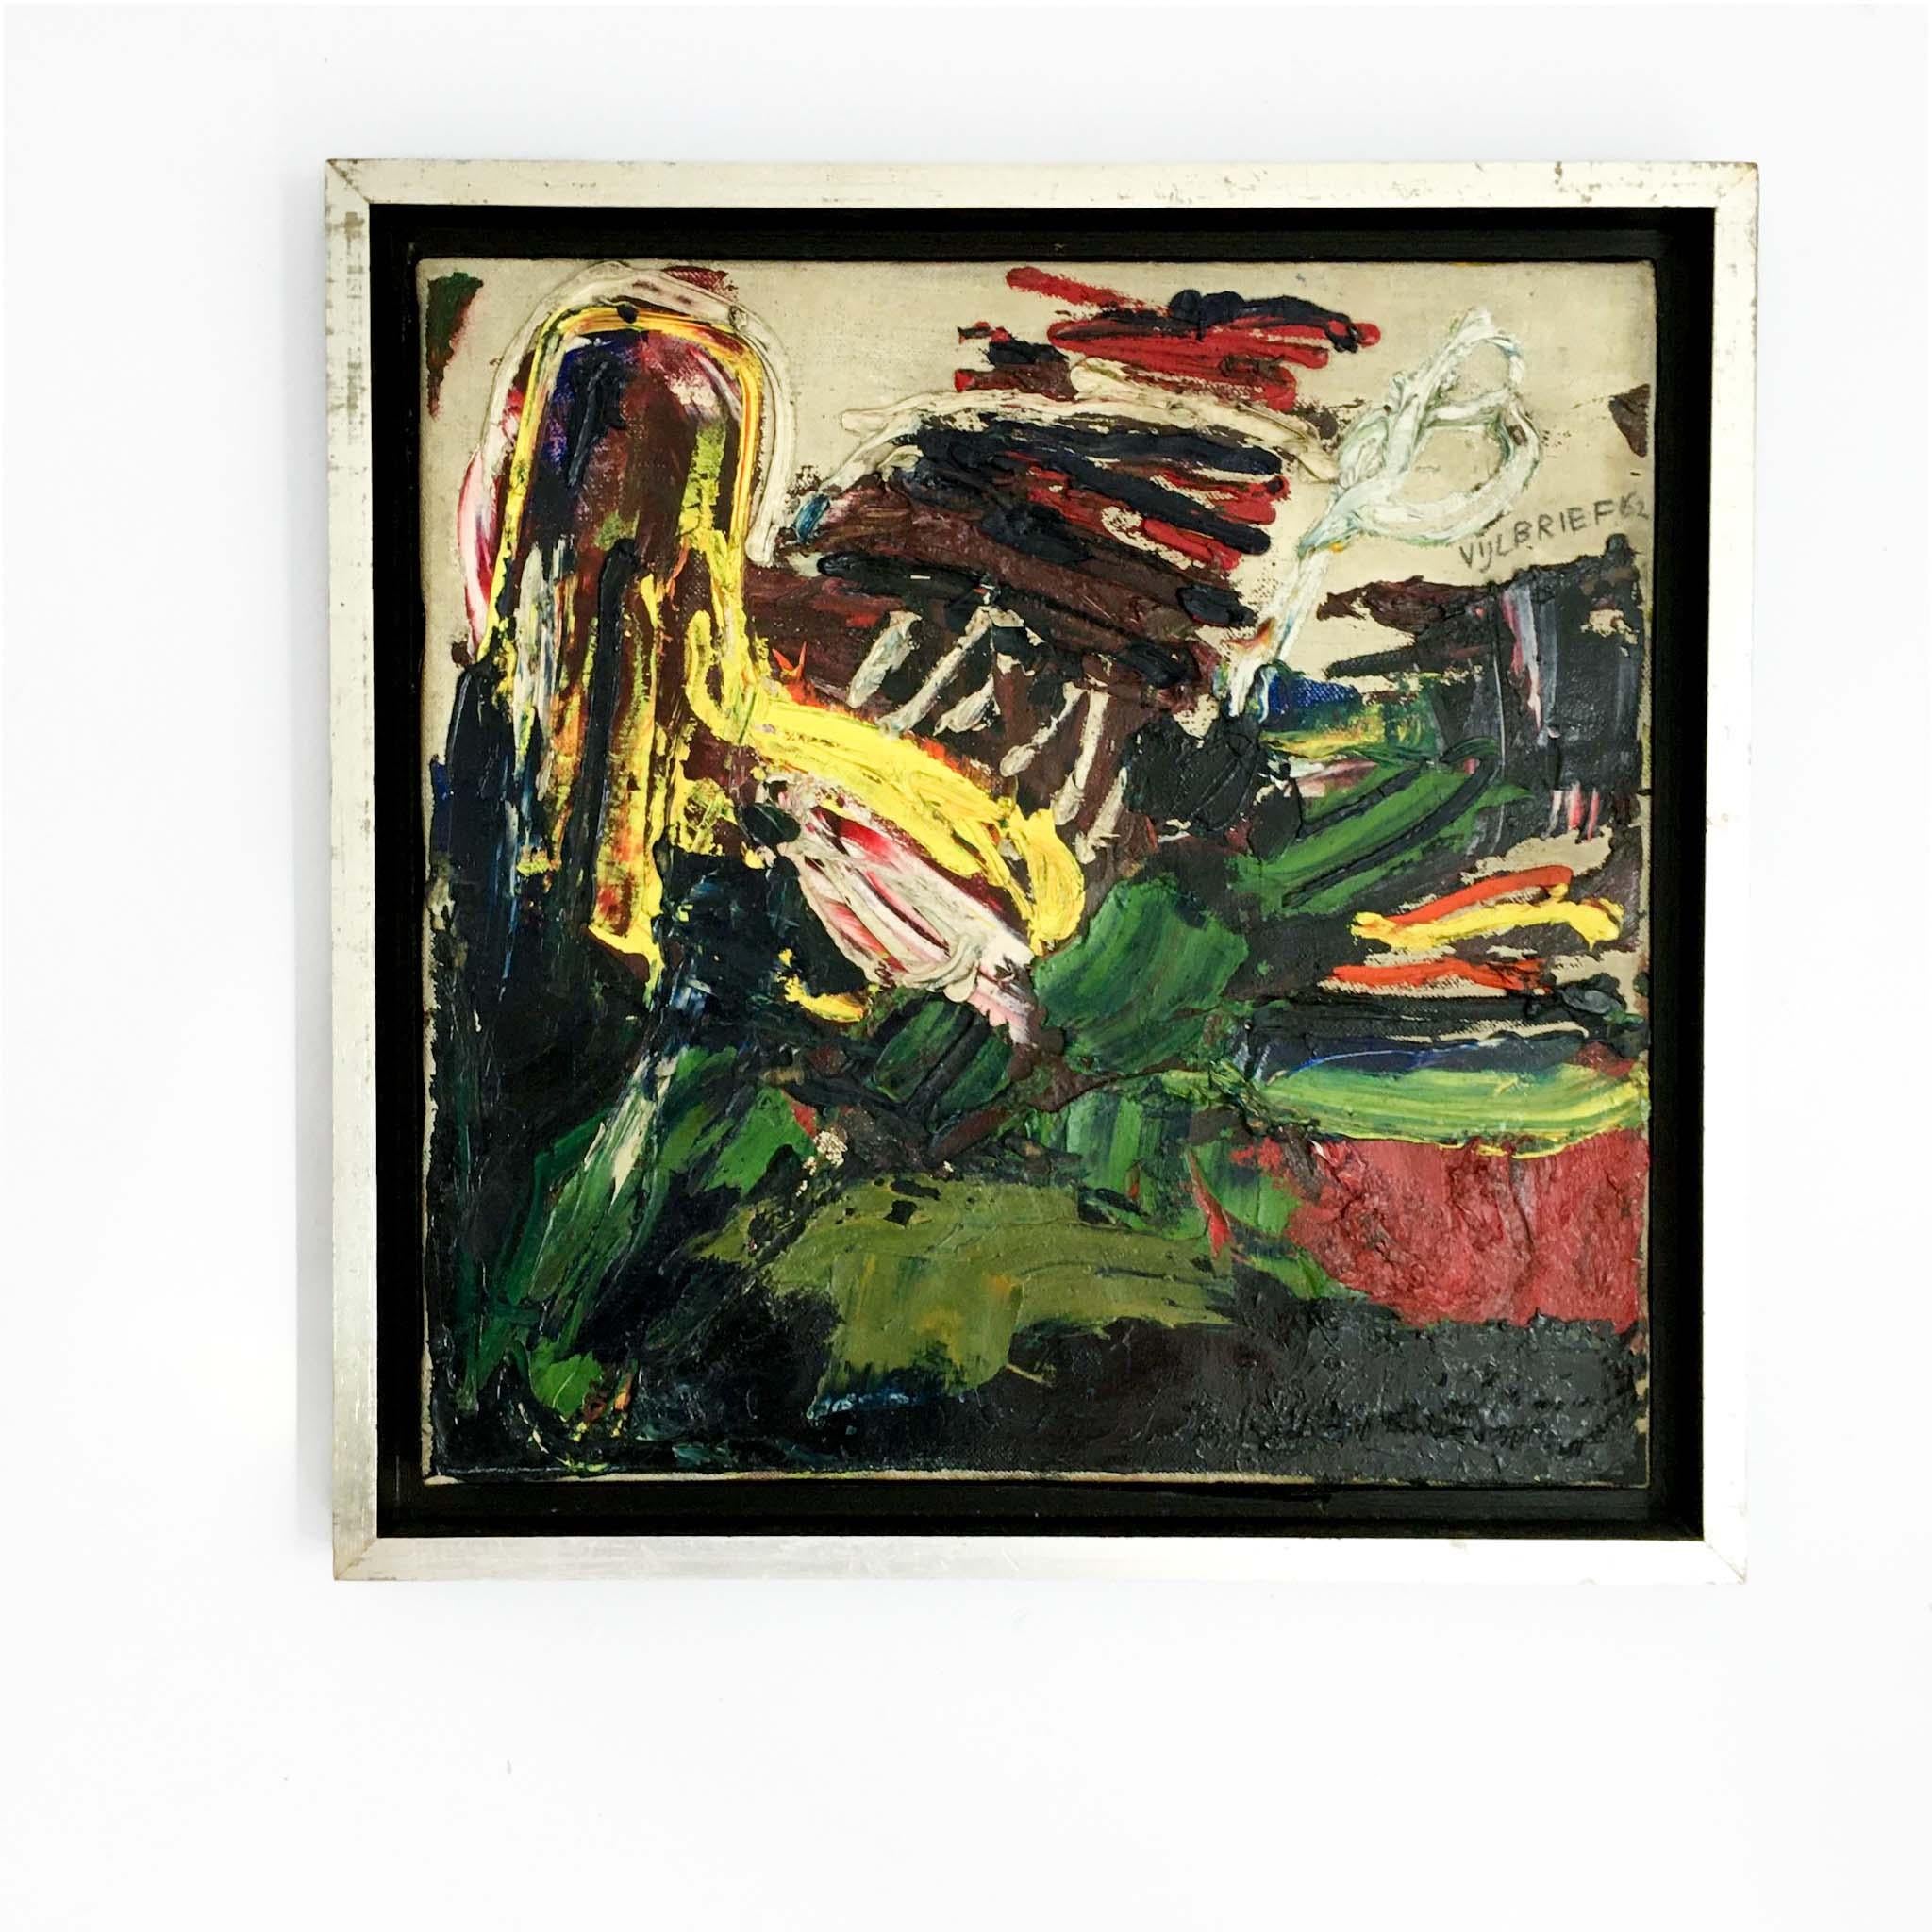 powerful work “Snake in wonderland” by Ernst Vijlbrief (1938-2010).

The expressive brushstrokes are typical for the style of Vijlbrief, connecting him to CoBrA and the expressive action paintings of Karel Appel. This small work is a great example